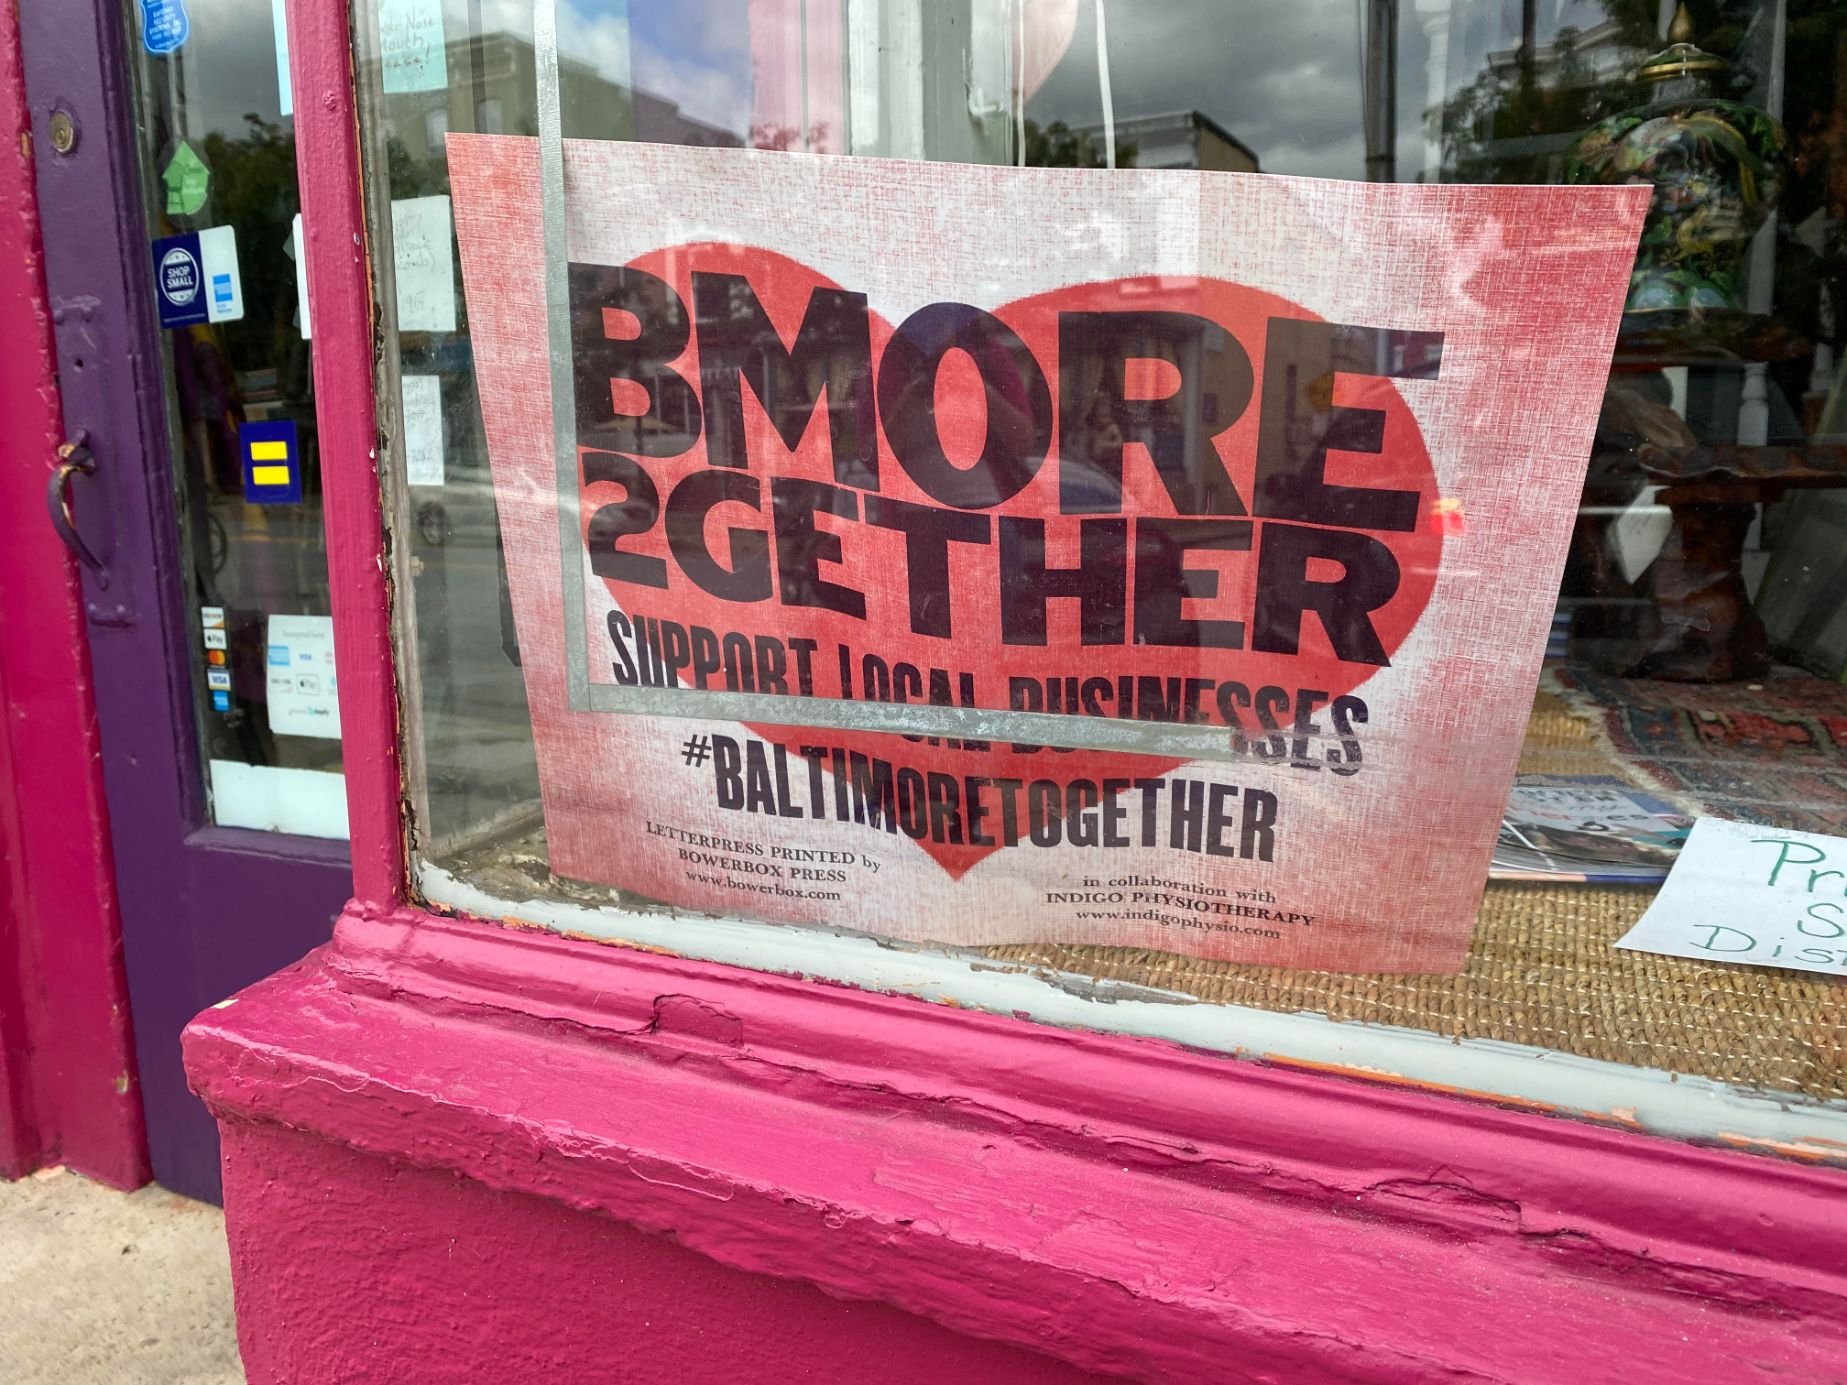 Bmore together